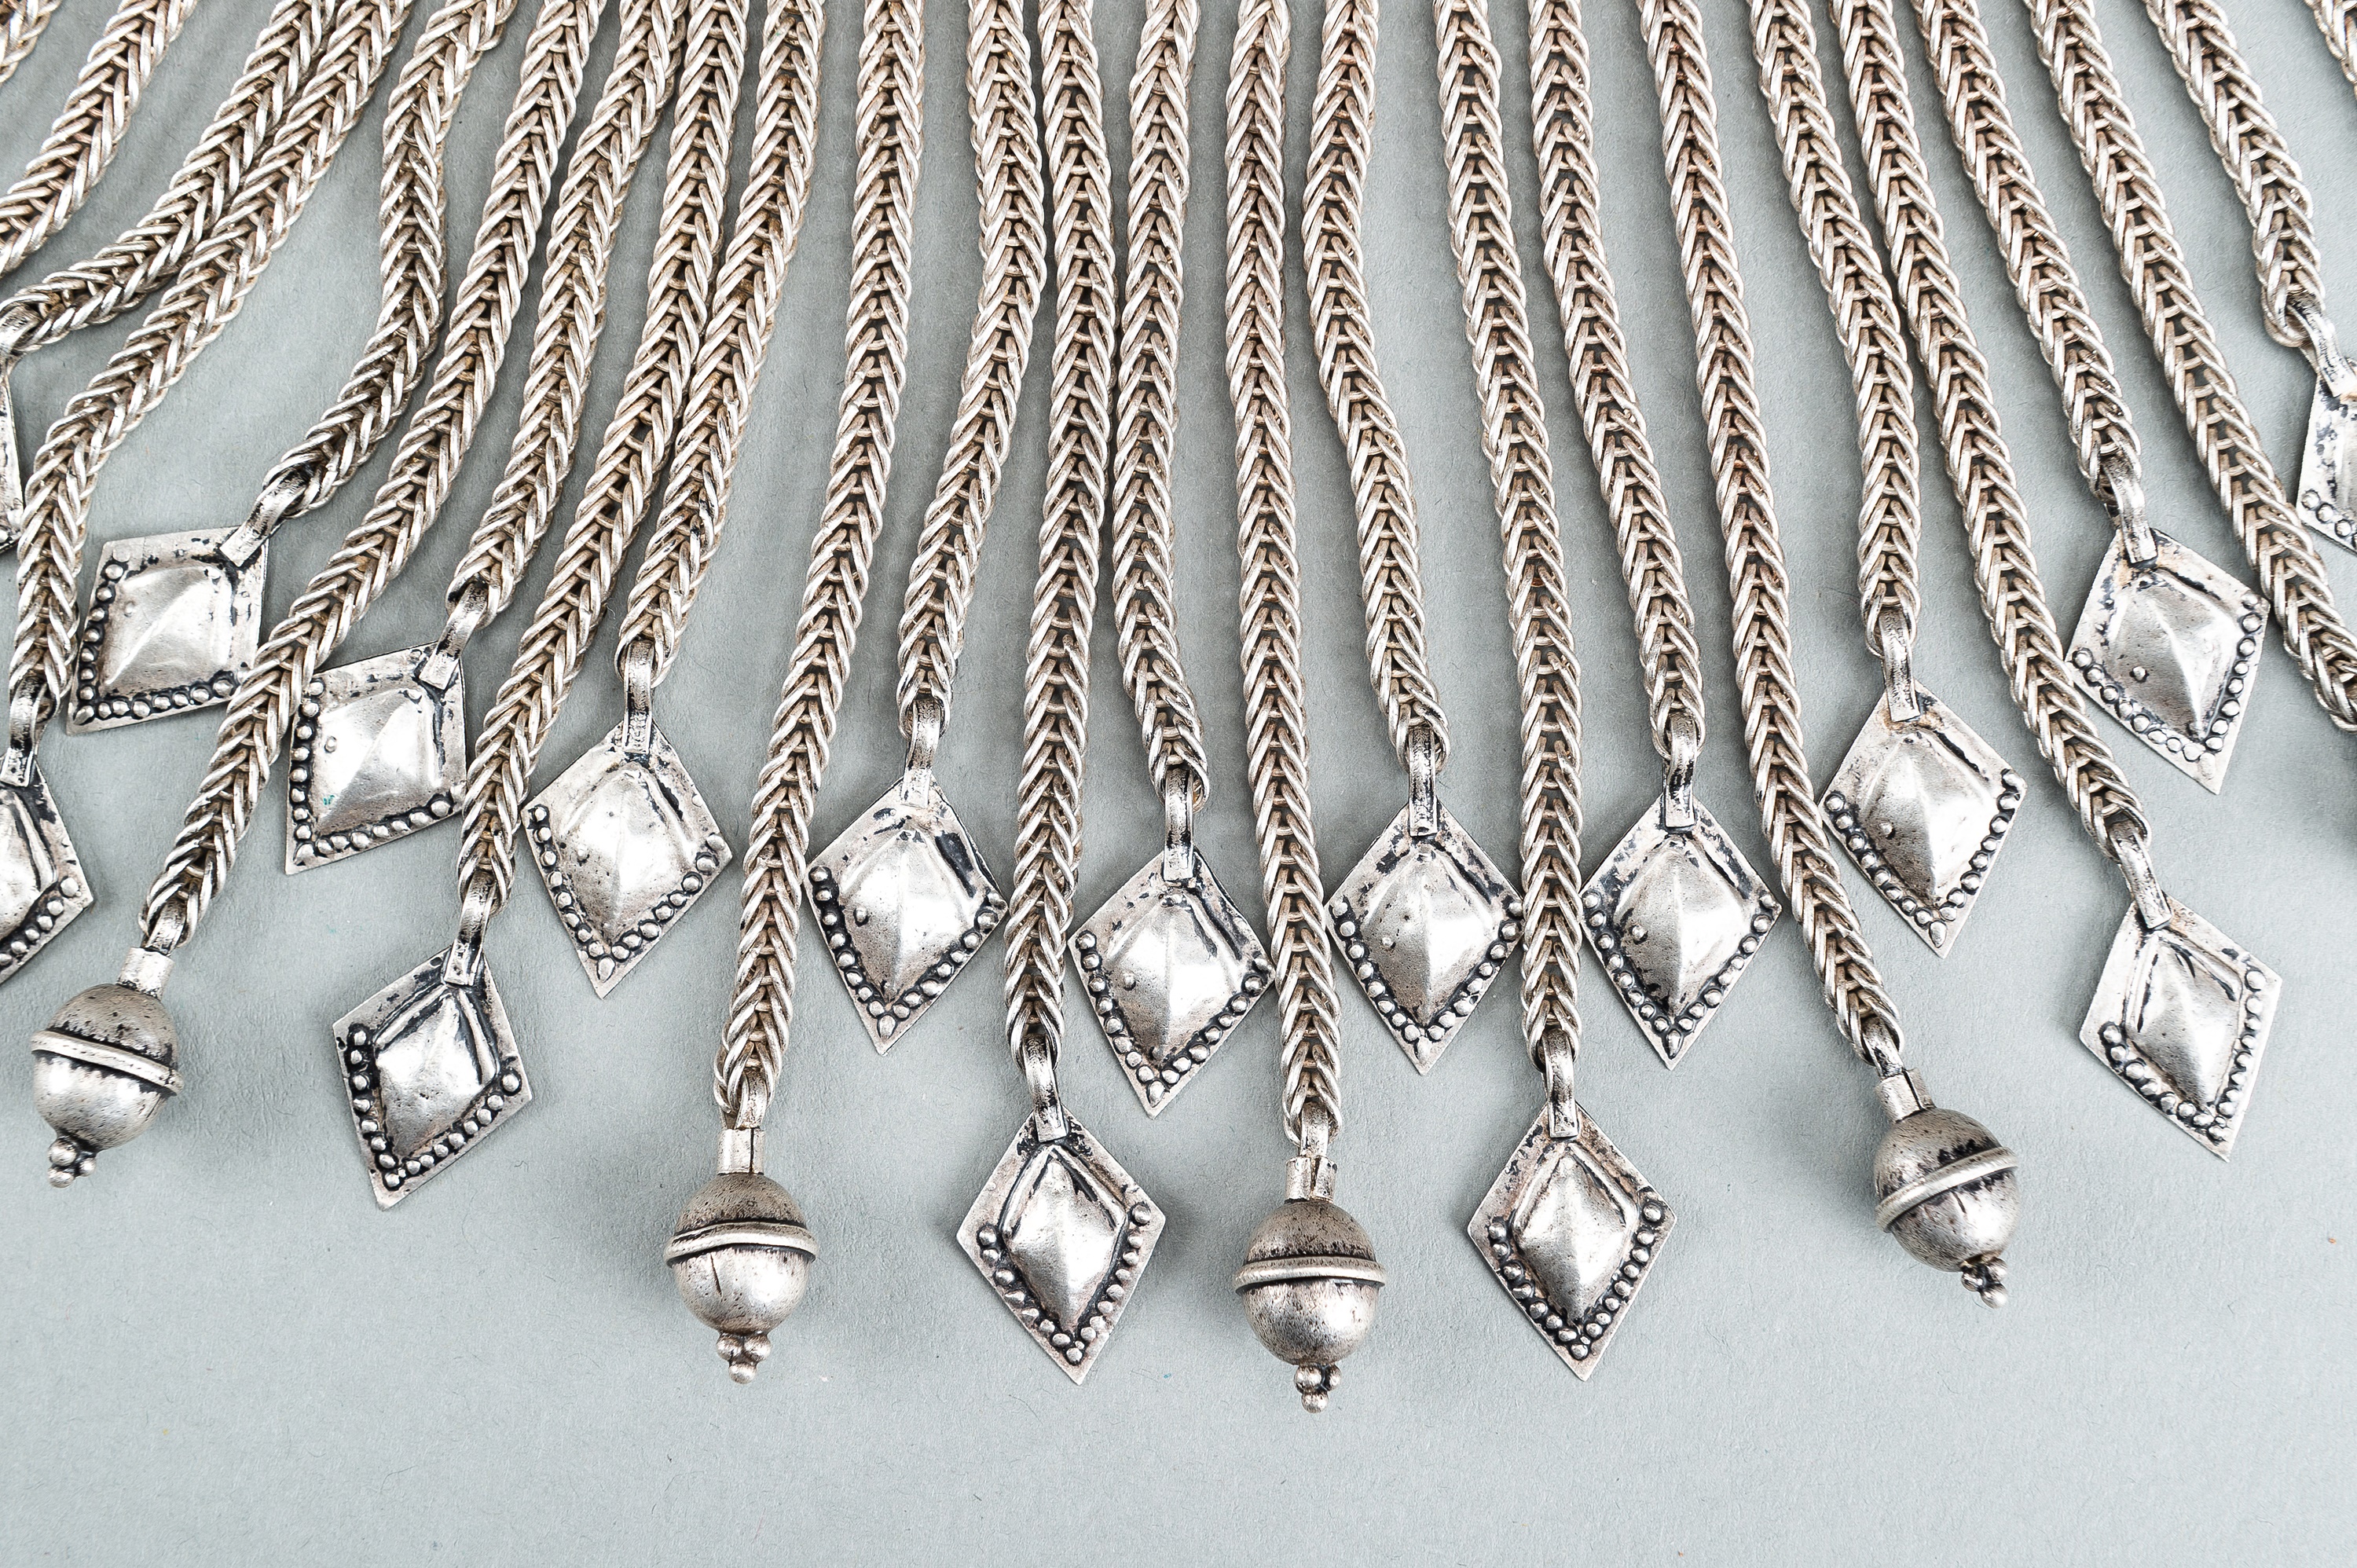 A TRIBAL AFGHAN MULTI-STRAND SILVER NECKLACE WITH GLASS INSETS, c. 1950s - Image 6 of 13